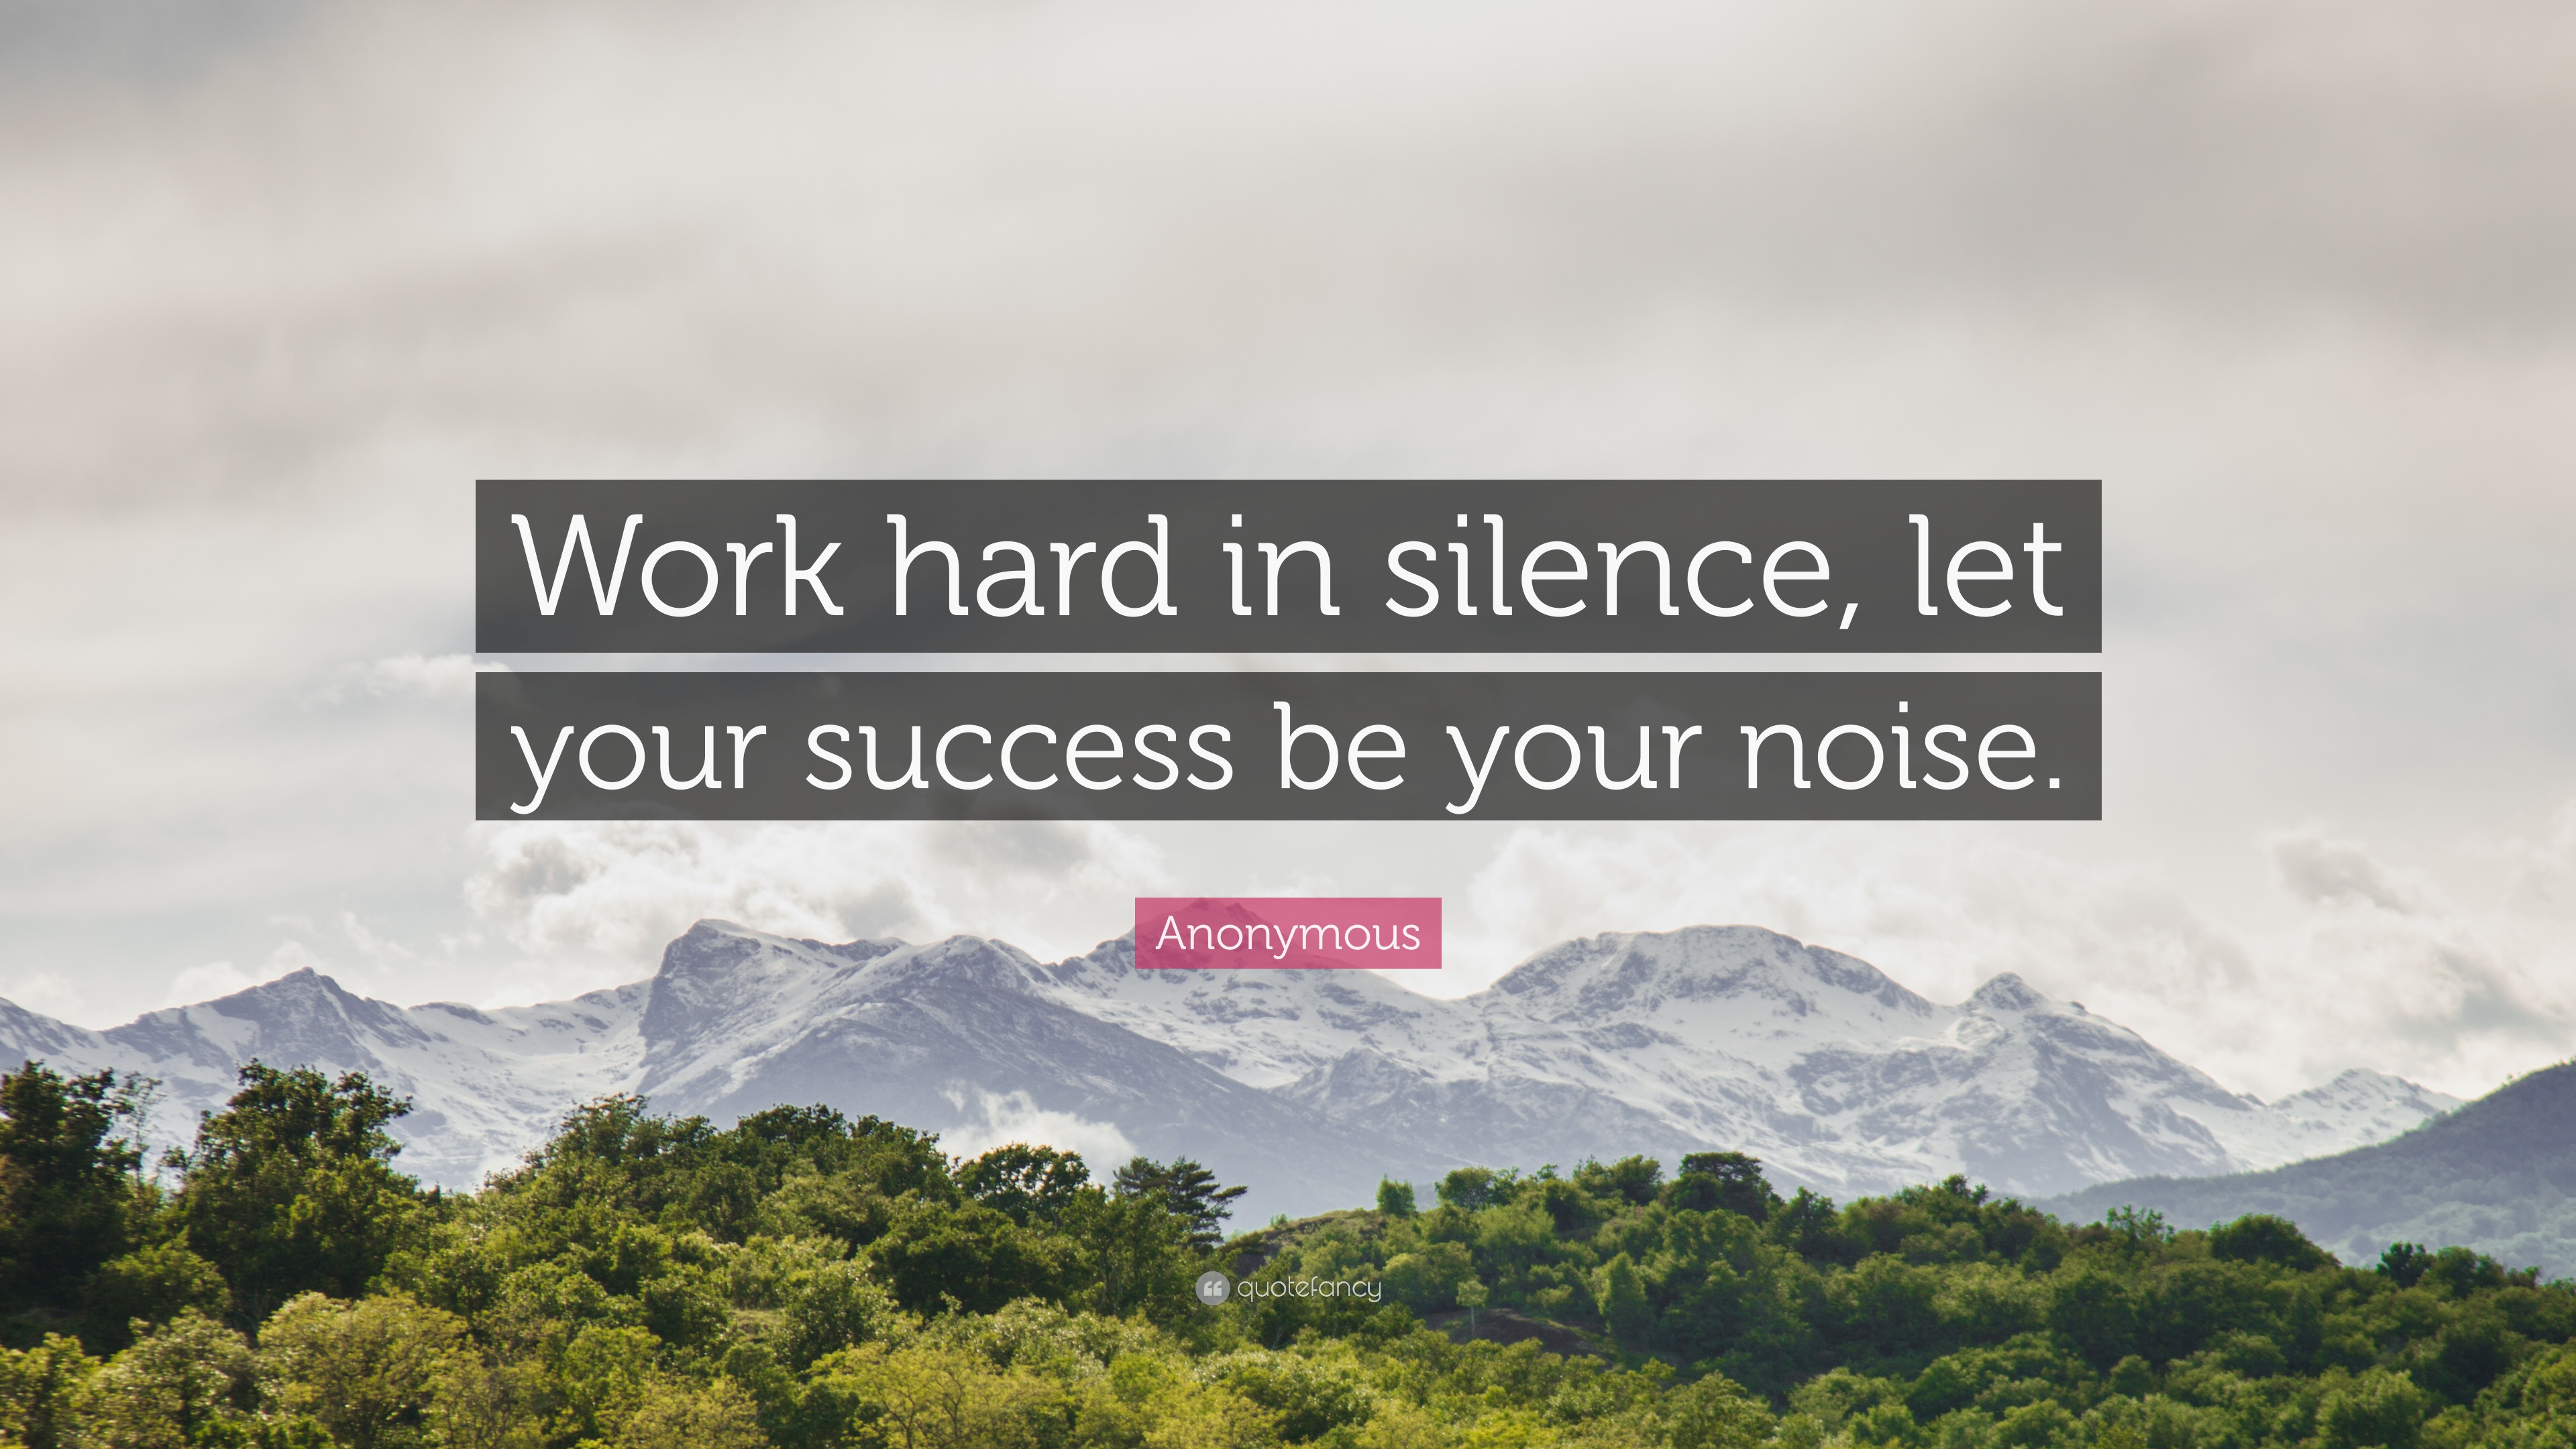 frank ocean quote: "work hard in silence, let your success be